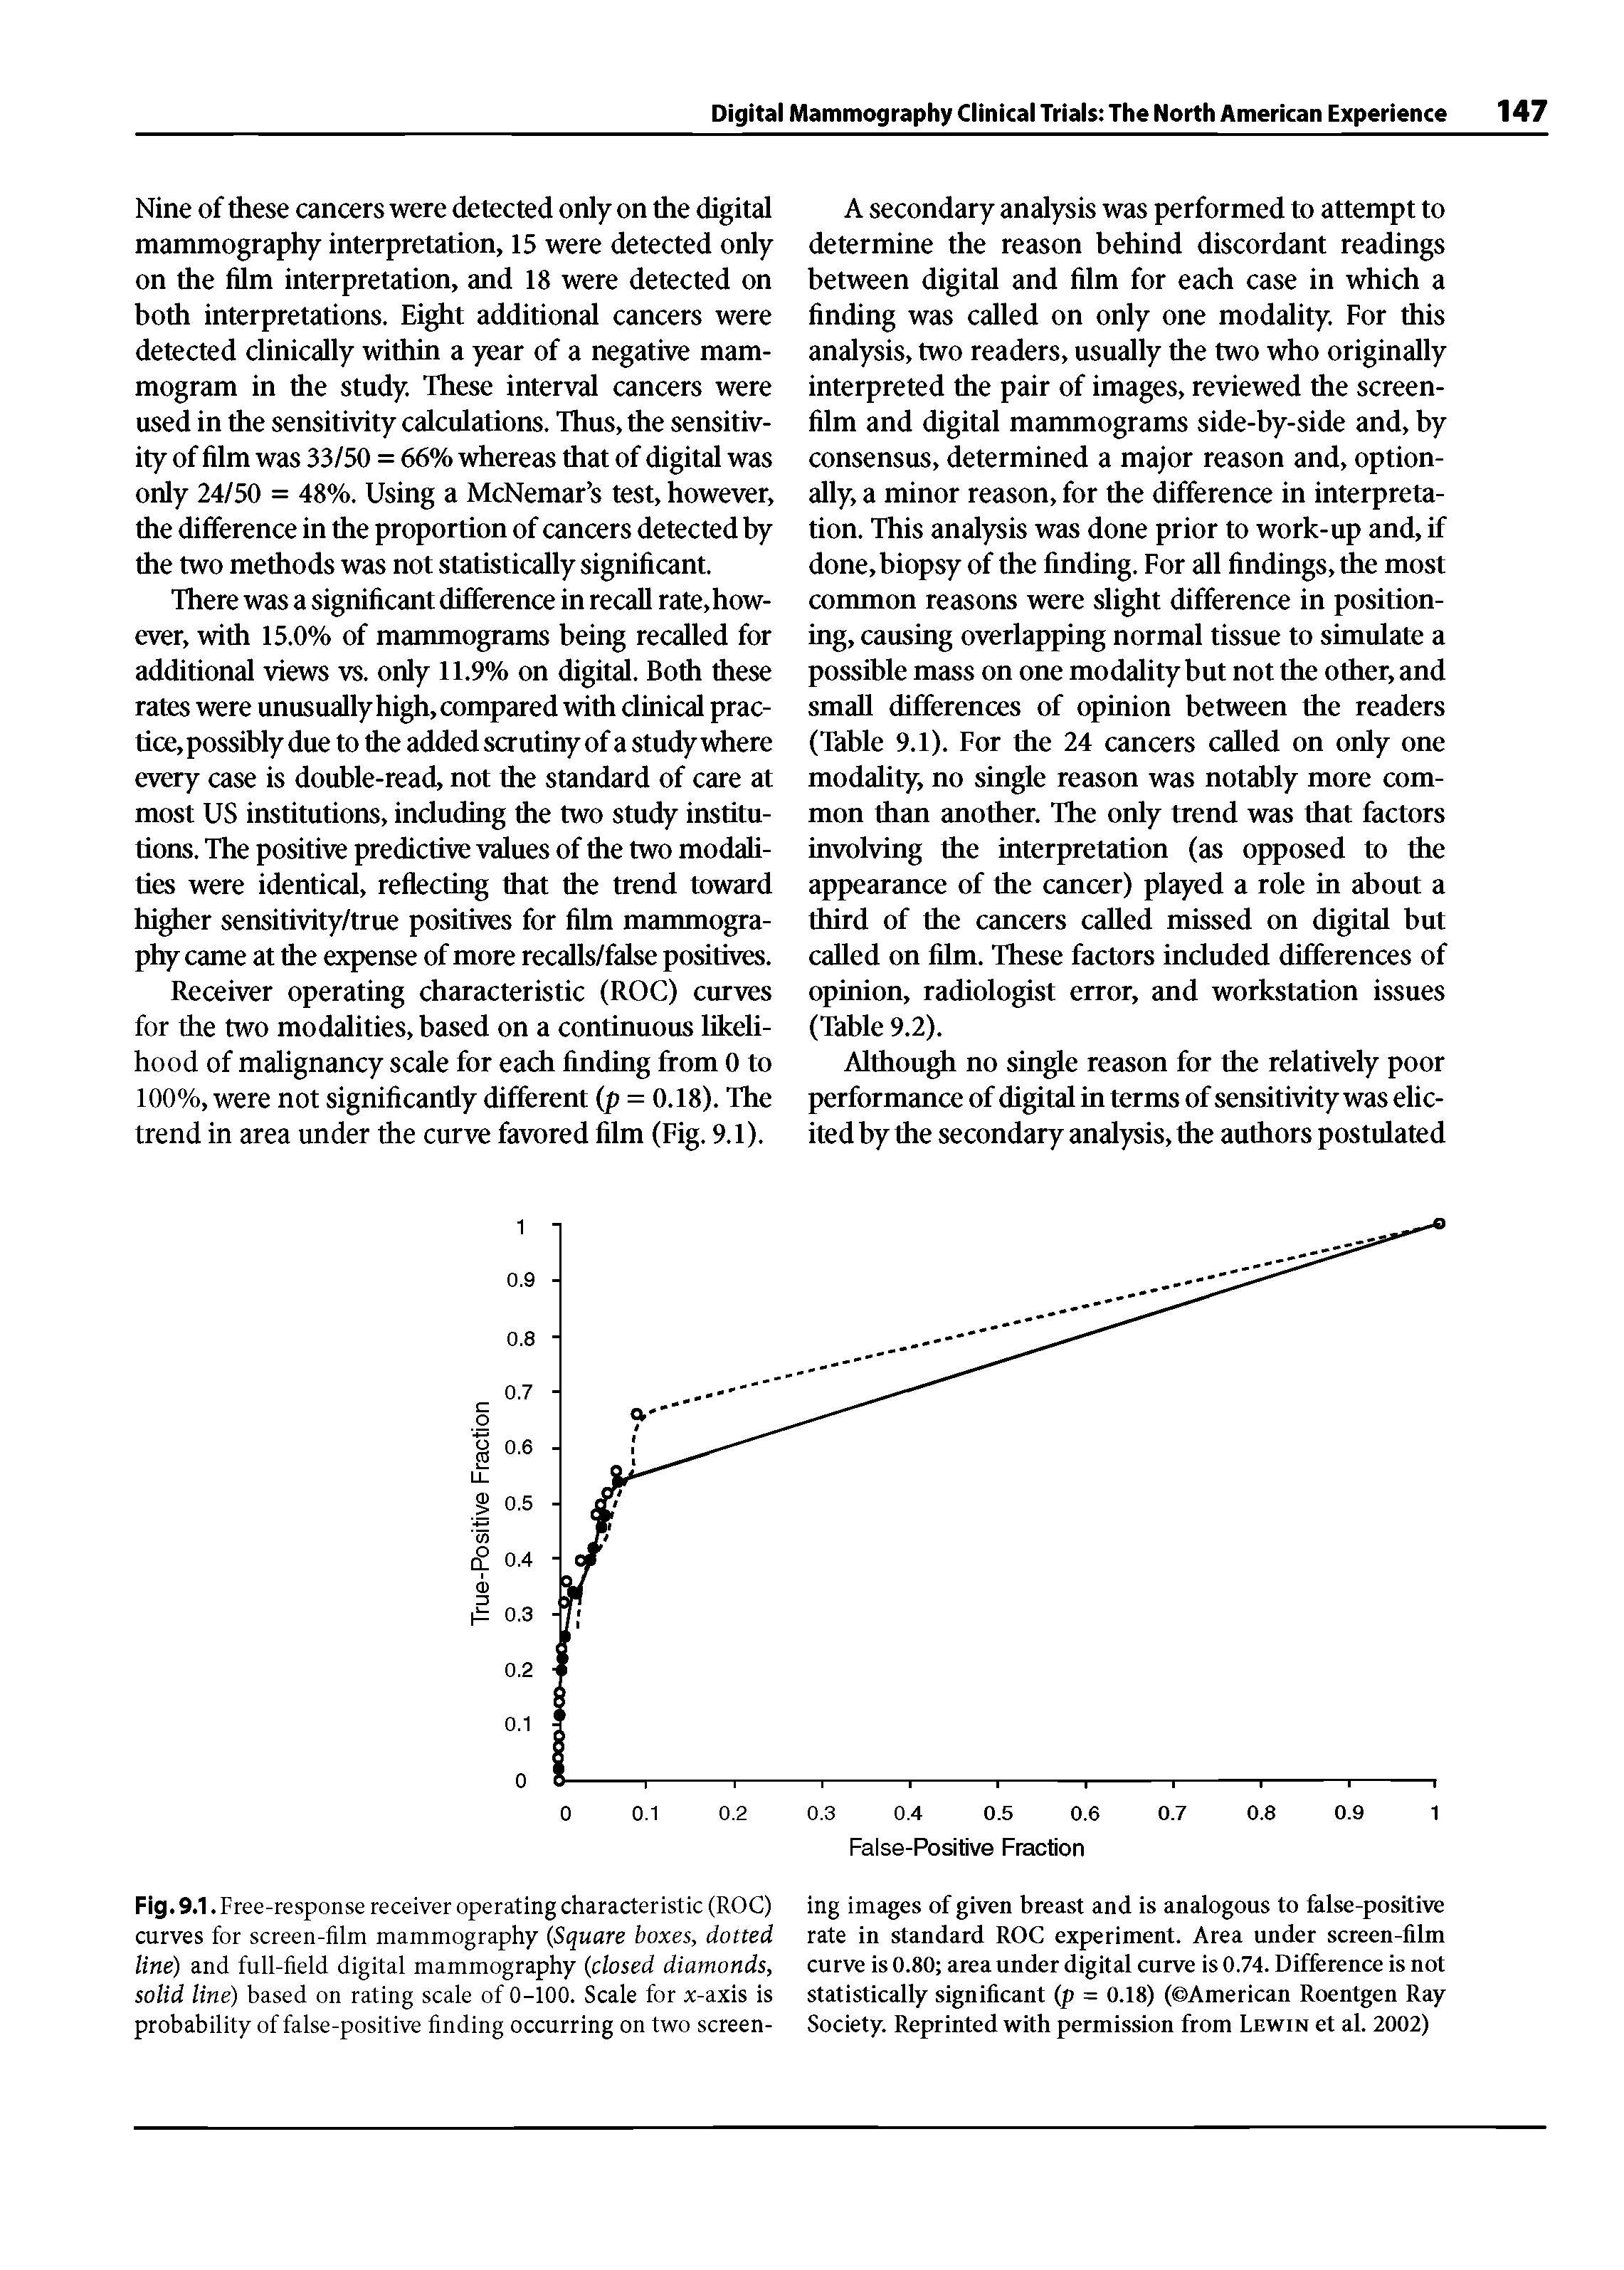 Fig.9.1. Free-response receiver operating characteristic (ROC) curves for screen-film mammography (Square boxes, dotted line) and full-field digital mammography (dosed diamonds, solid line) based on rating scale of 0-100. Scale for a -axis is probability of false-positive finding occurring on two screen-...